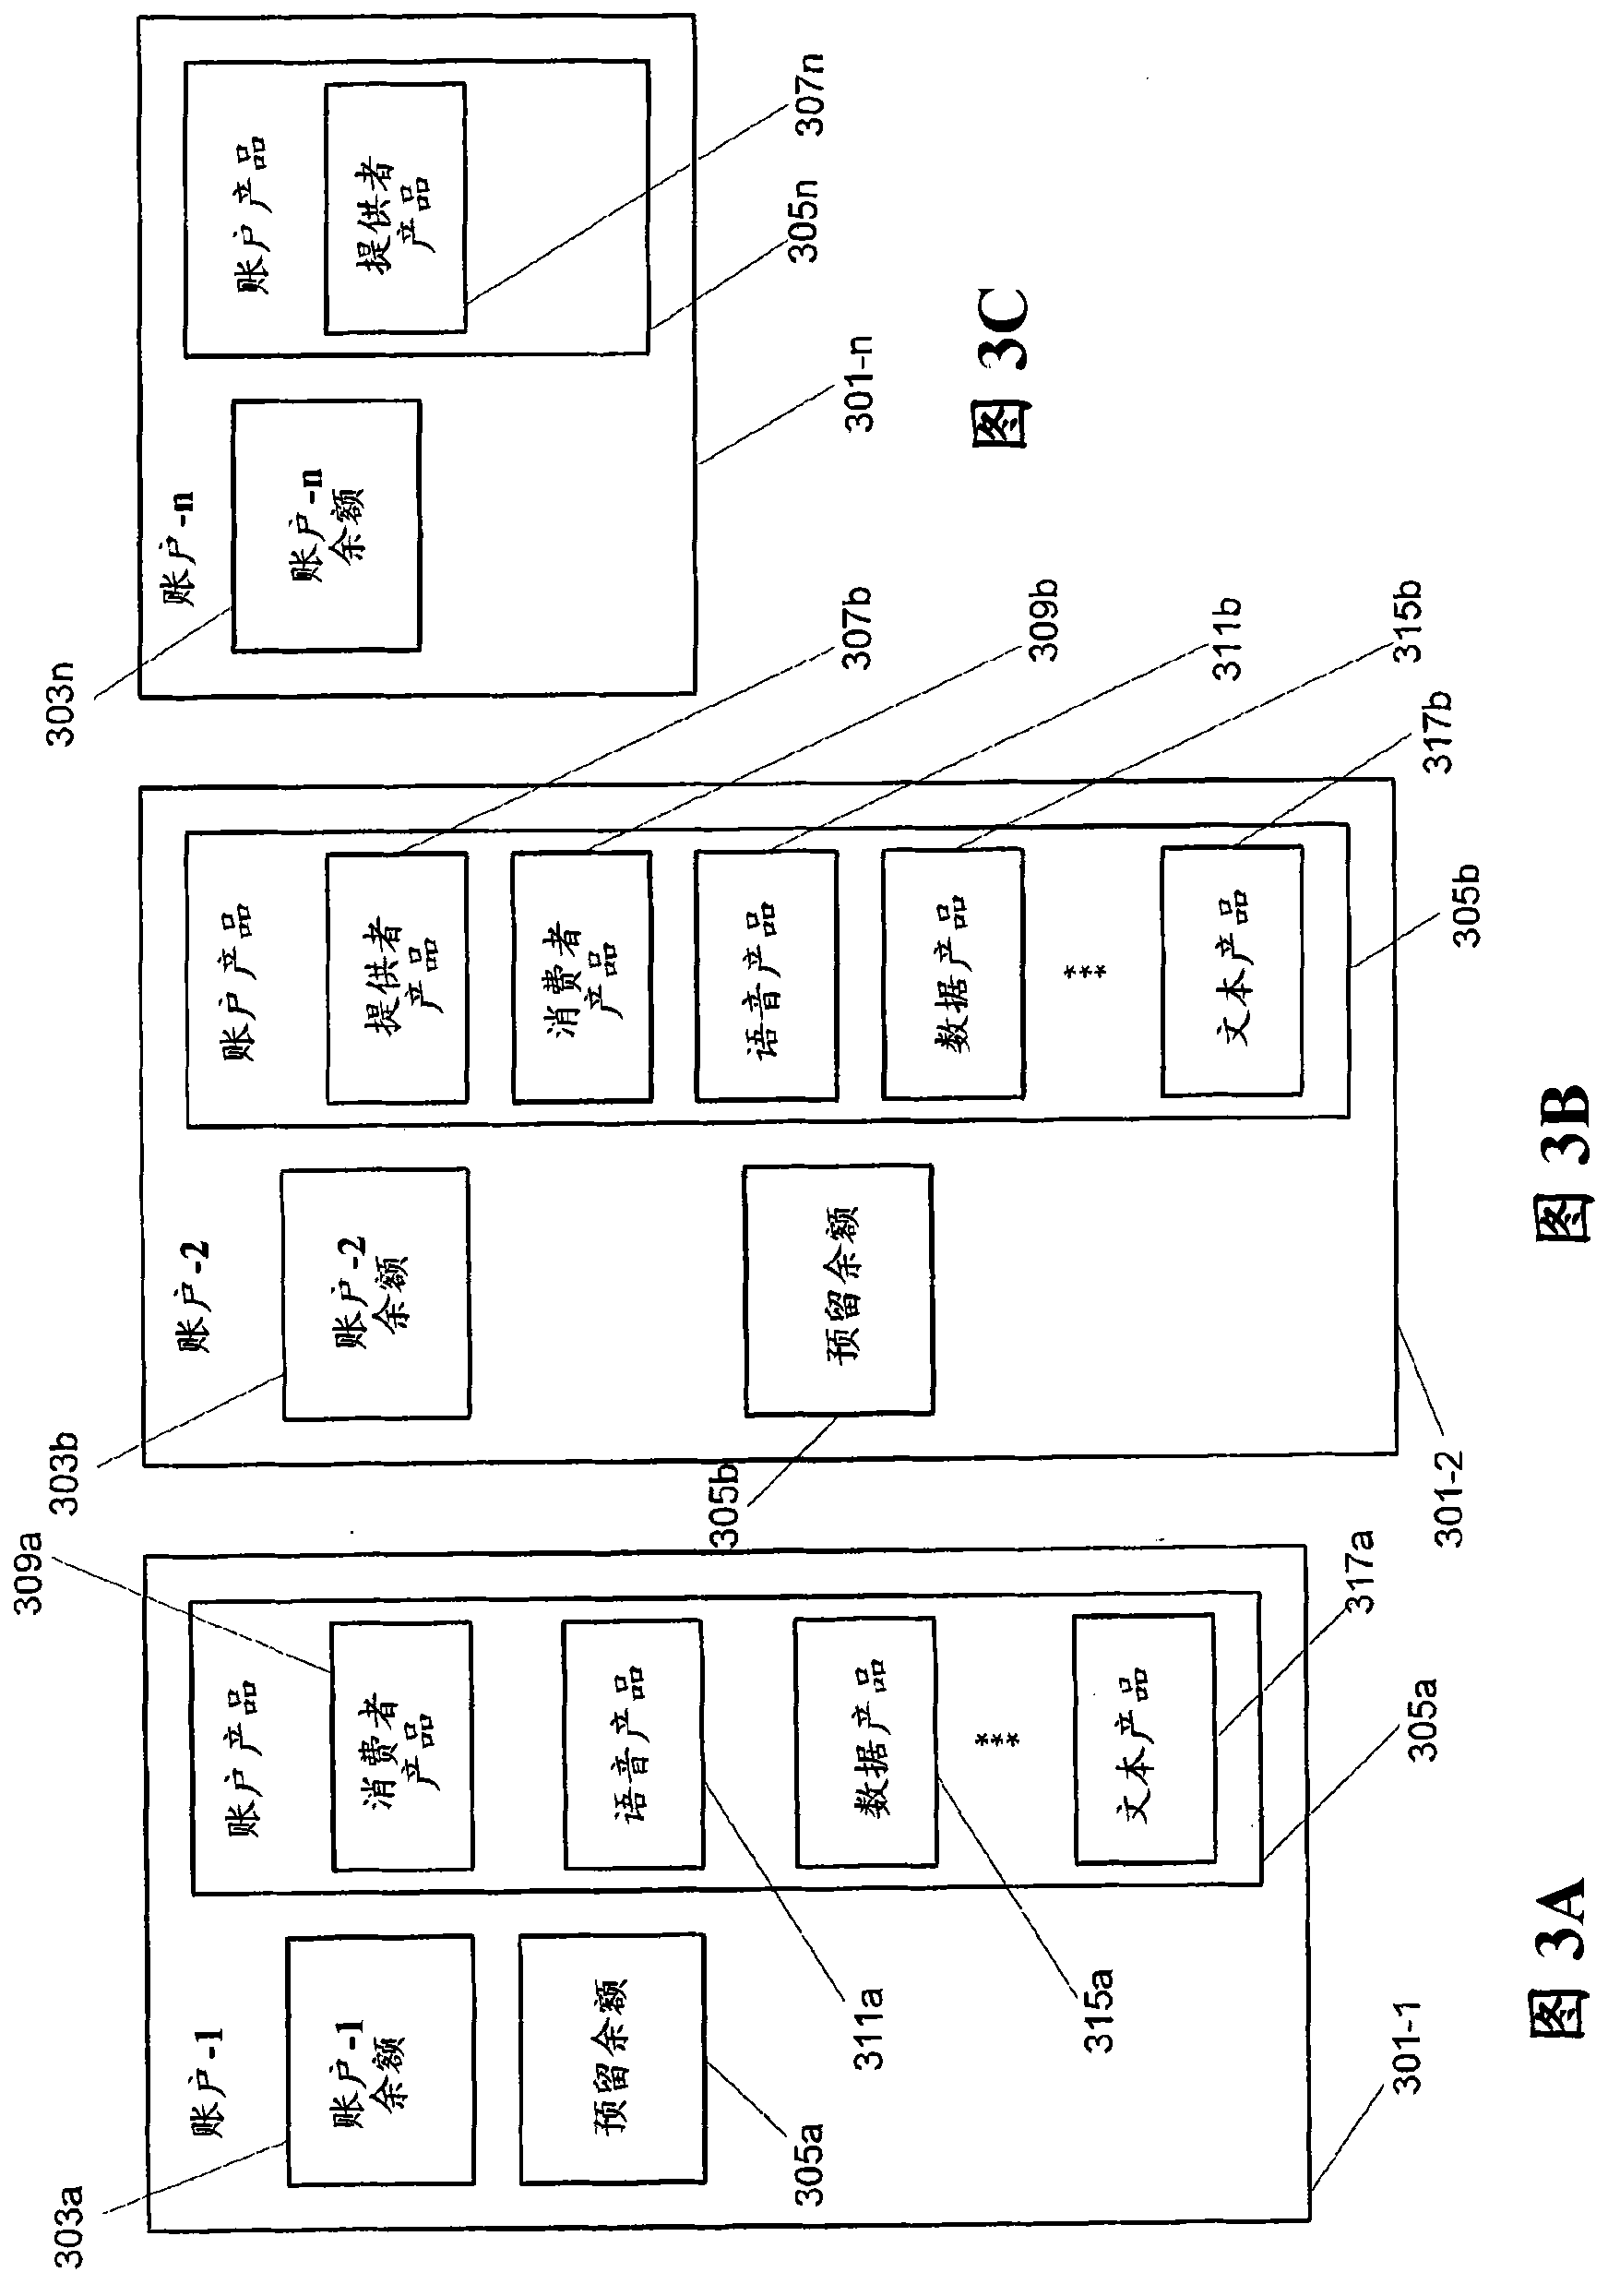 Methods of providing communication services including account balance sharing and related charging systems